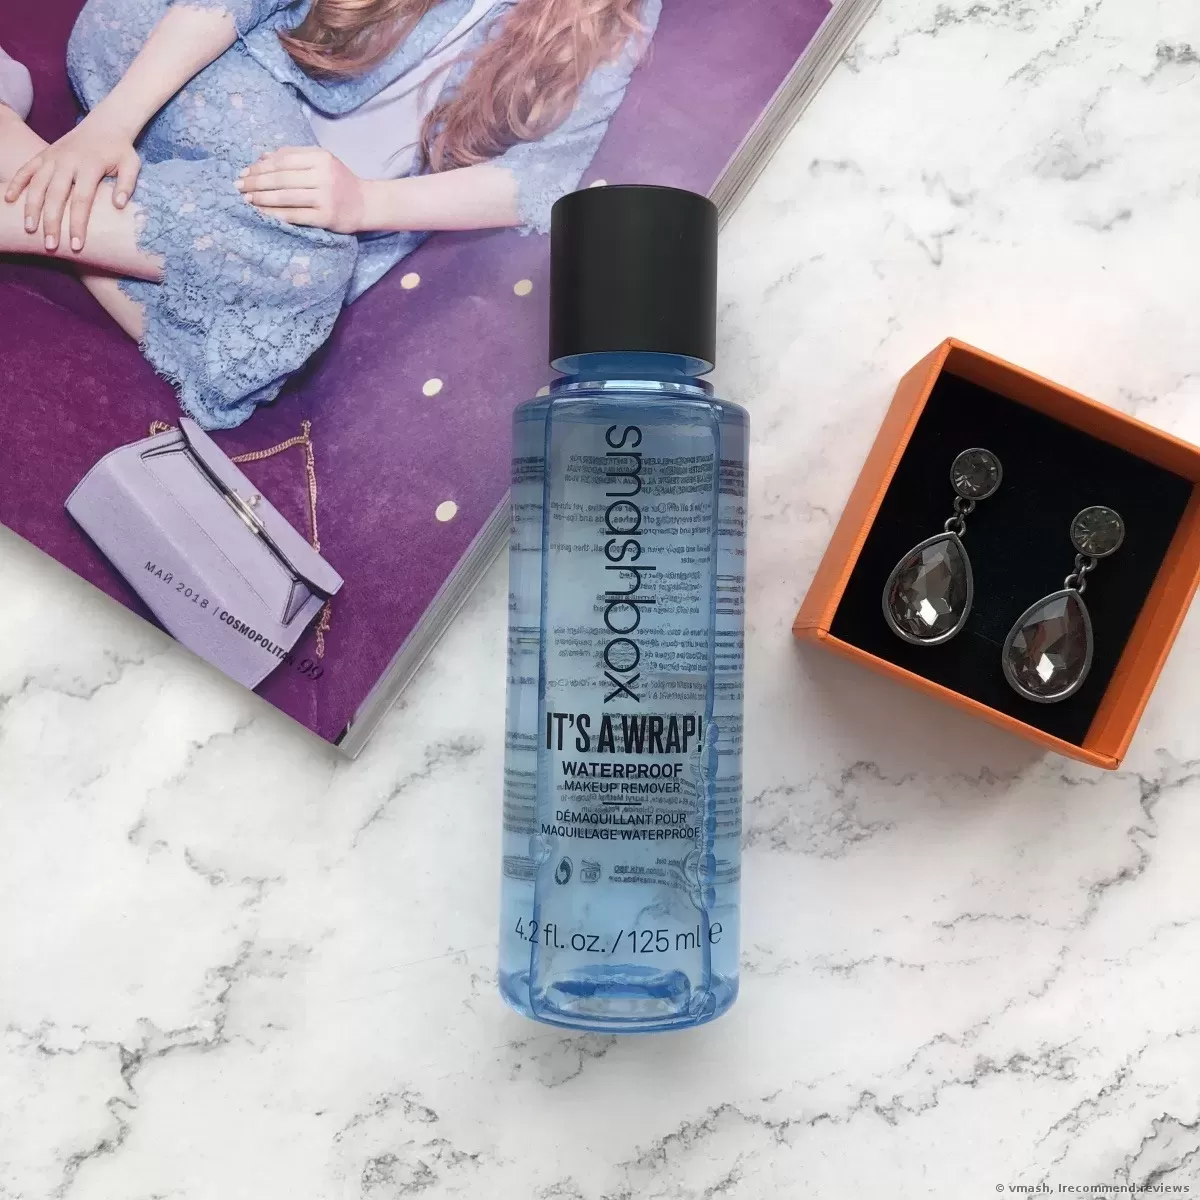 about Micellar Water Smashbox smashbox ITS A WRAP! WATERPROOF MAKEUP REMOVER